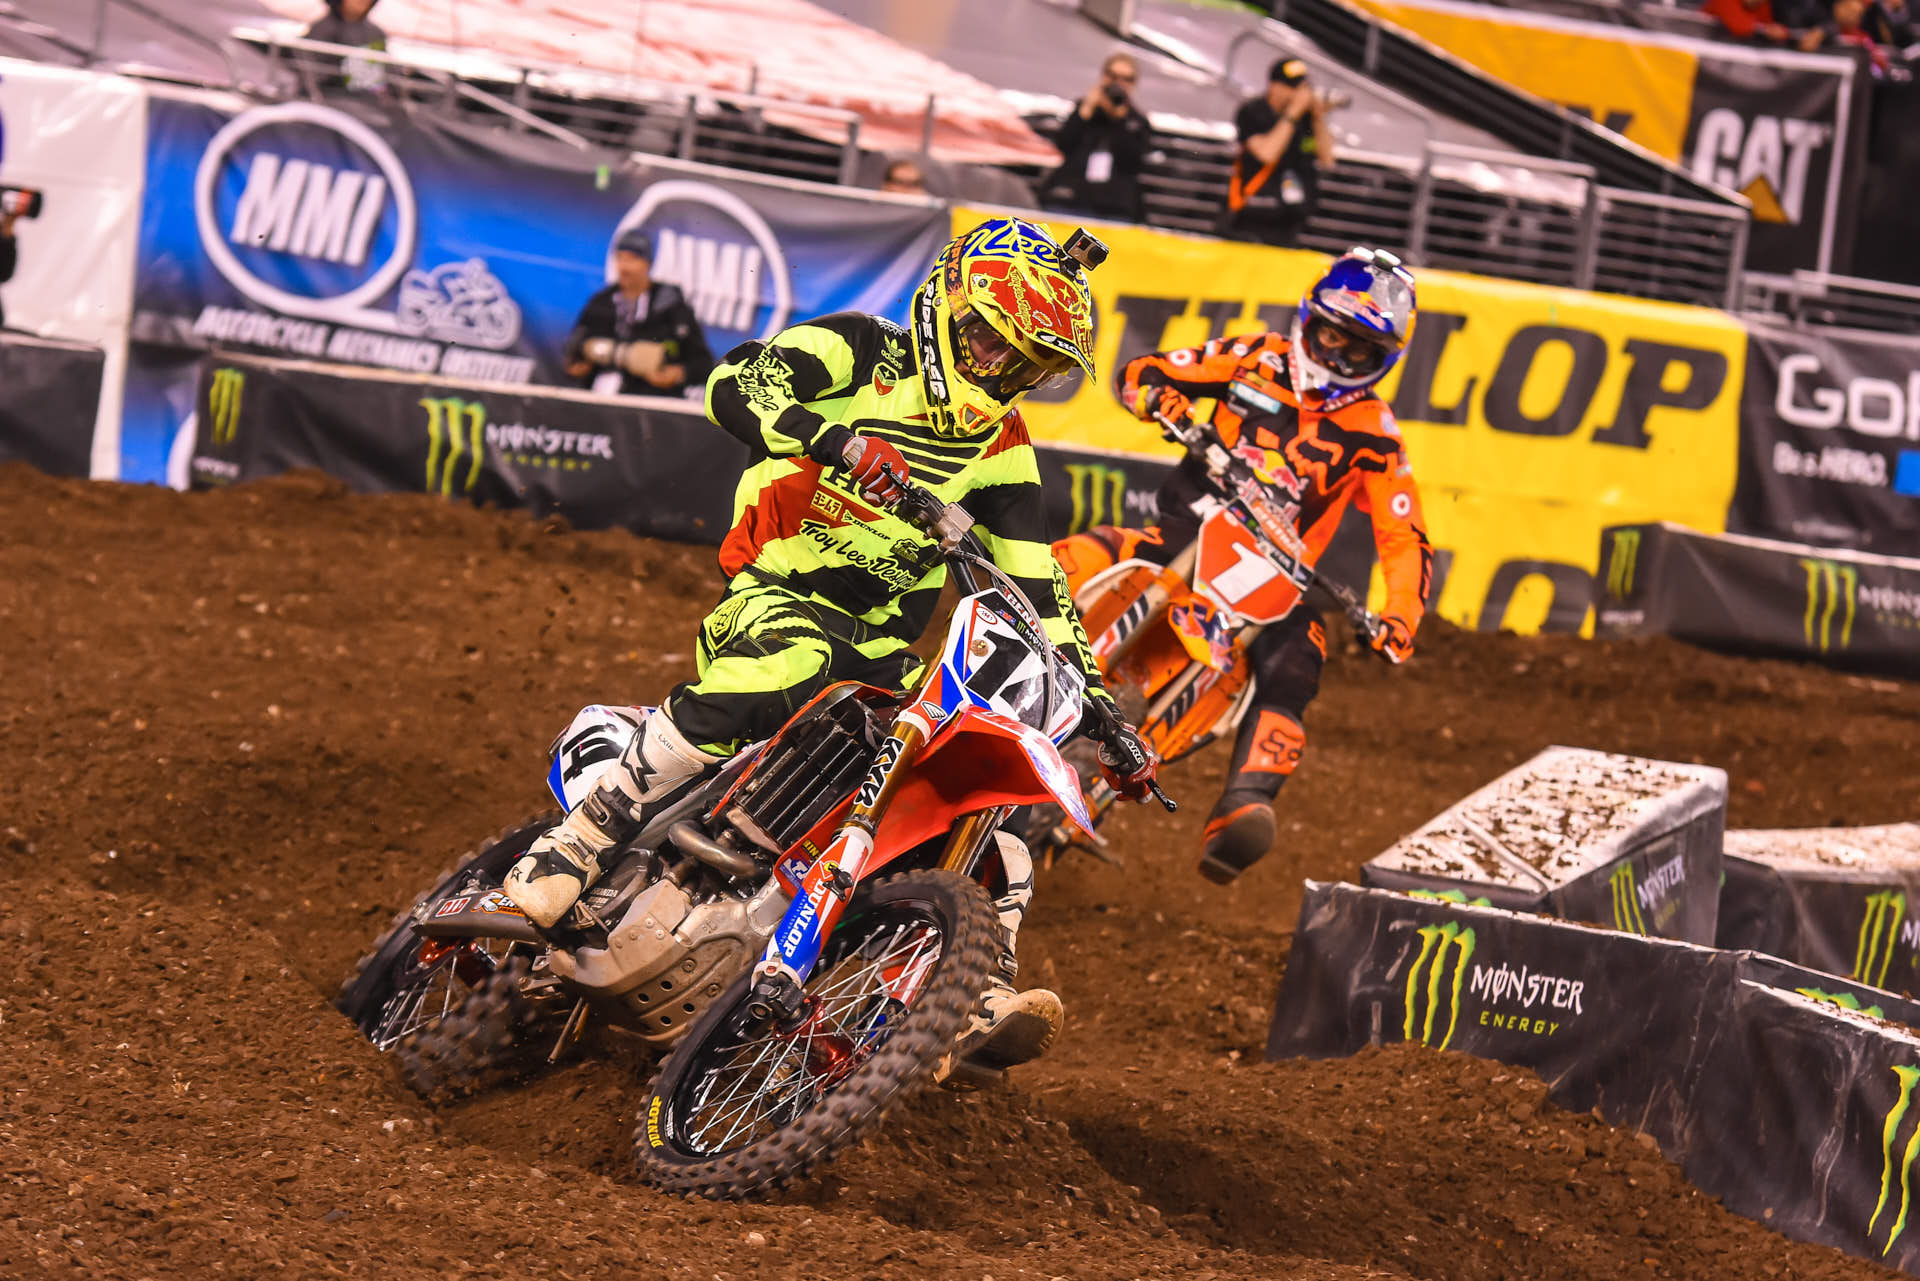 Cole (#14) held strong under extreme pressure from Ryan Dungey (#1) late in the race. Ryan was bound and determined to keep his podium streak alive, but Cole kept him at bay. 